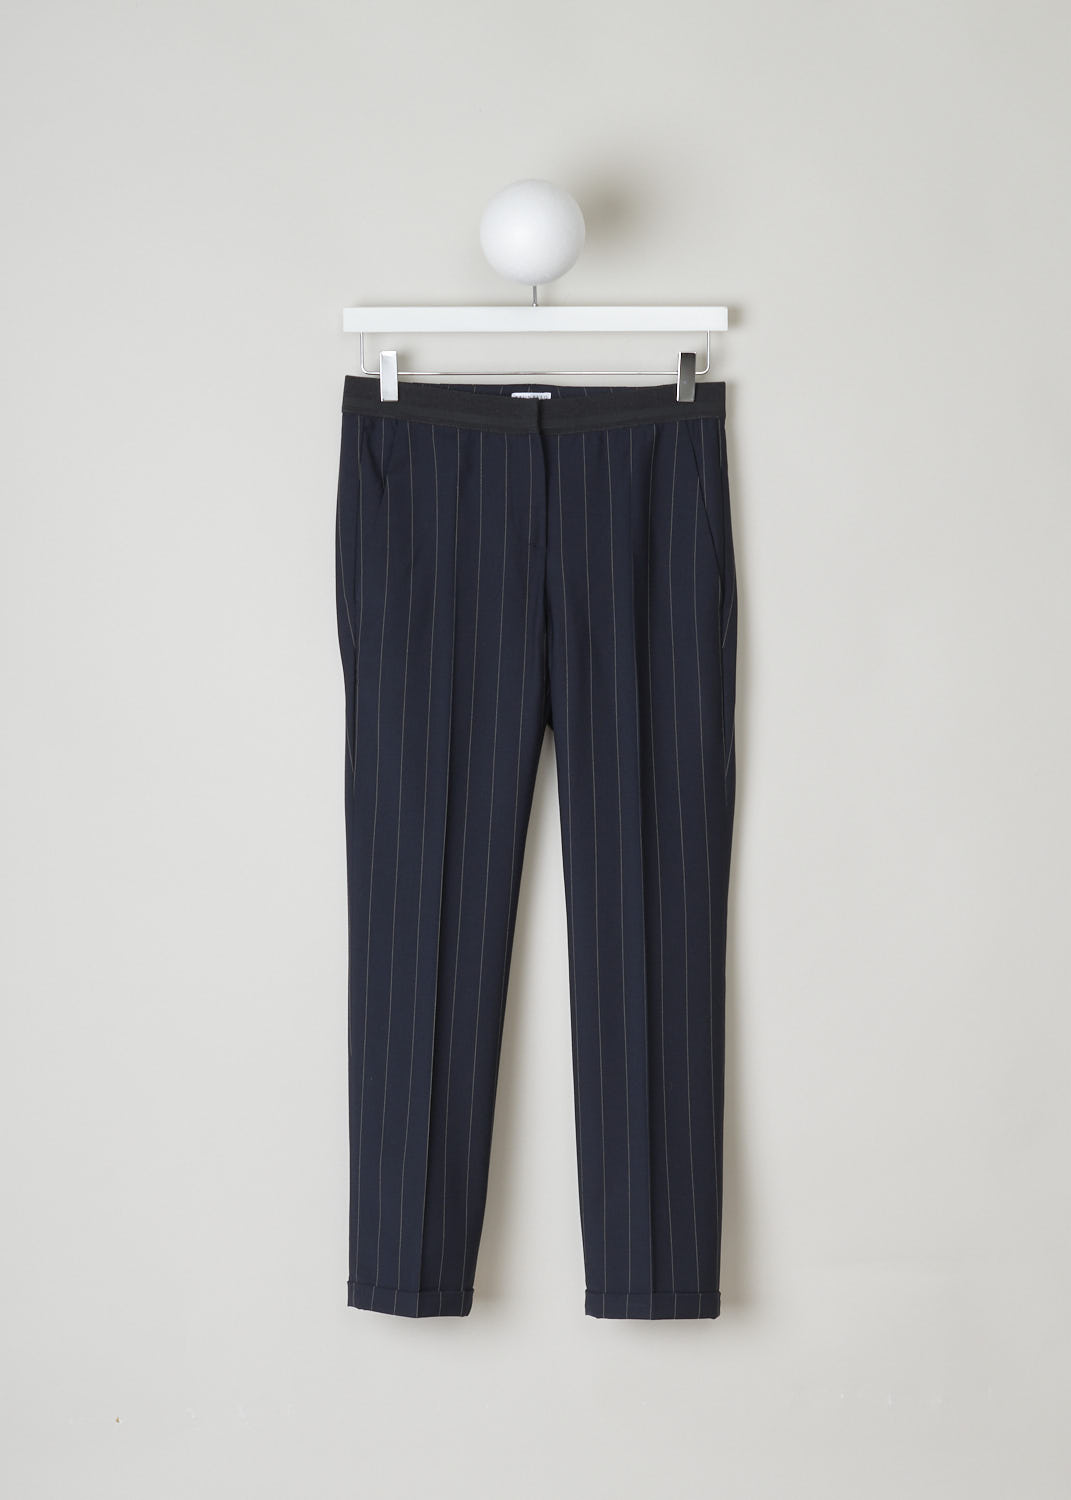 BRUNELLO CUCINELLI, NAVY BLUE TROUSERS WITH PINSTRIPE, M0H35P1500_C6009, Blue, Front, These navy blue pinstripe trousers are made of a wool blend. Featuring a partly elasticated waistline, forward slanted pockets in the front, and two buttoned welt pockets in the back. Along the length of the pant leg, centre creases can be found. These trousers have a folded hem.
